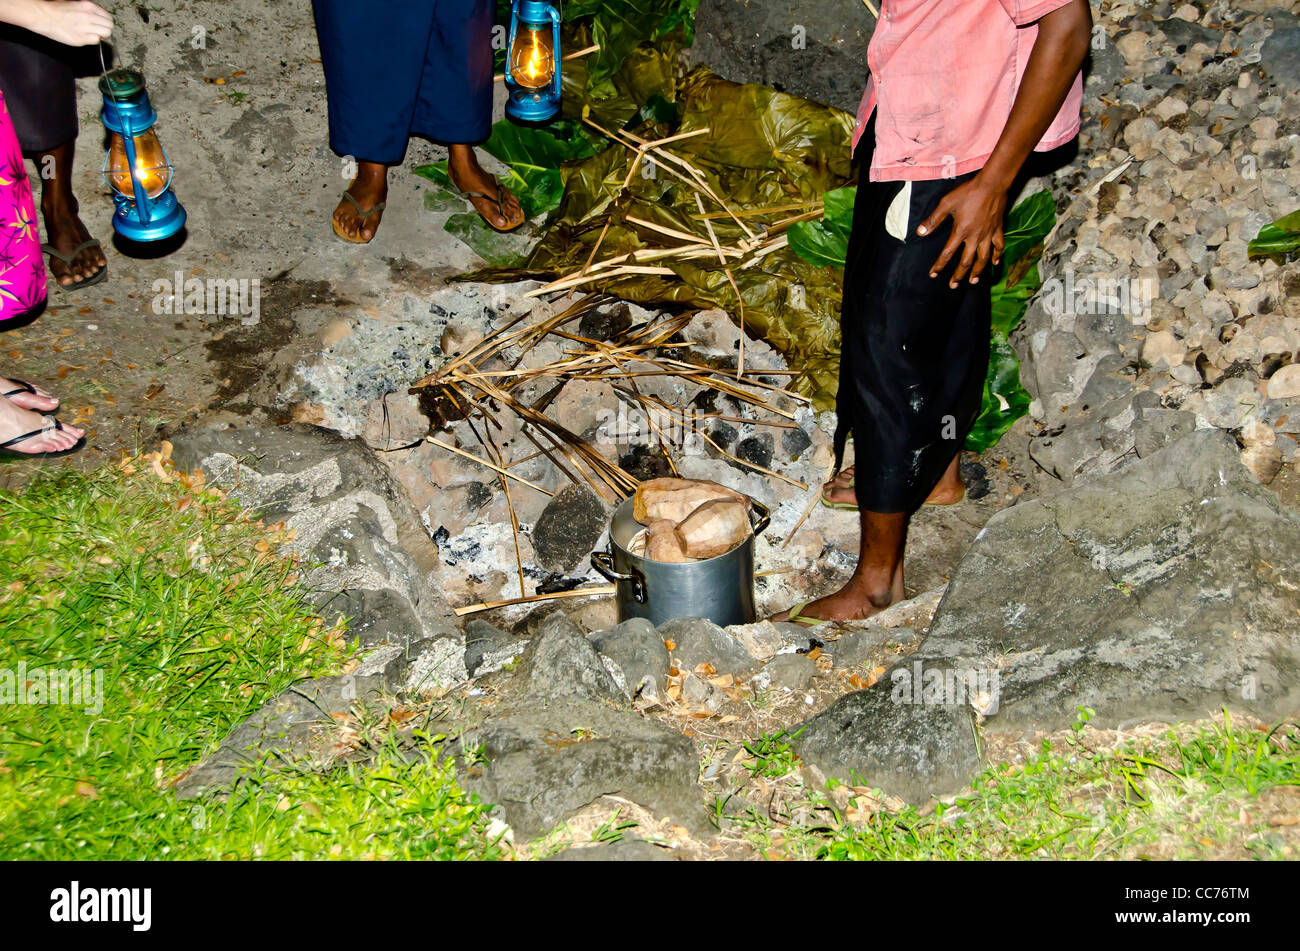 Fiji underground cooking method called a lovo, iconic South Seas culture Stock Photo